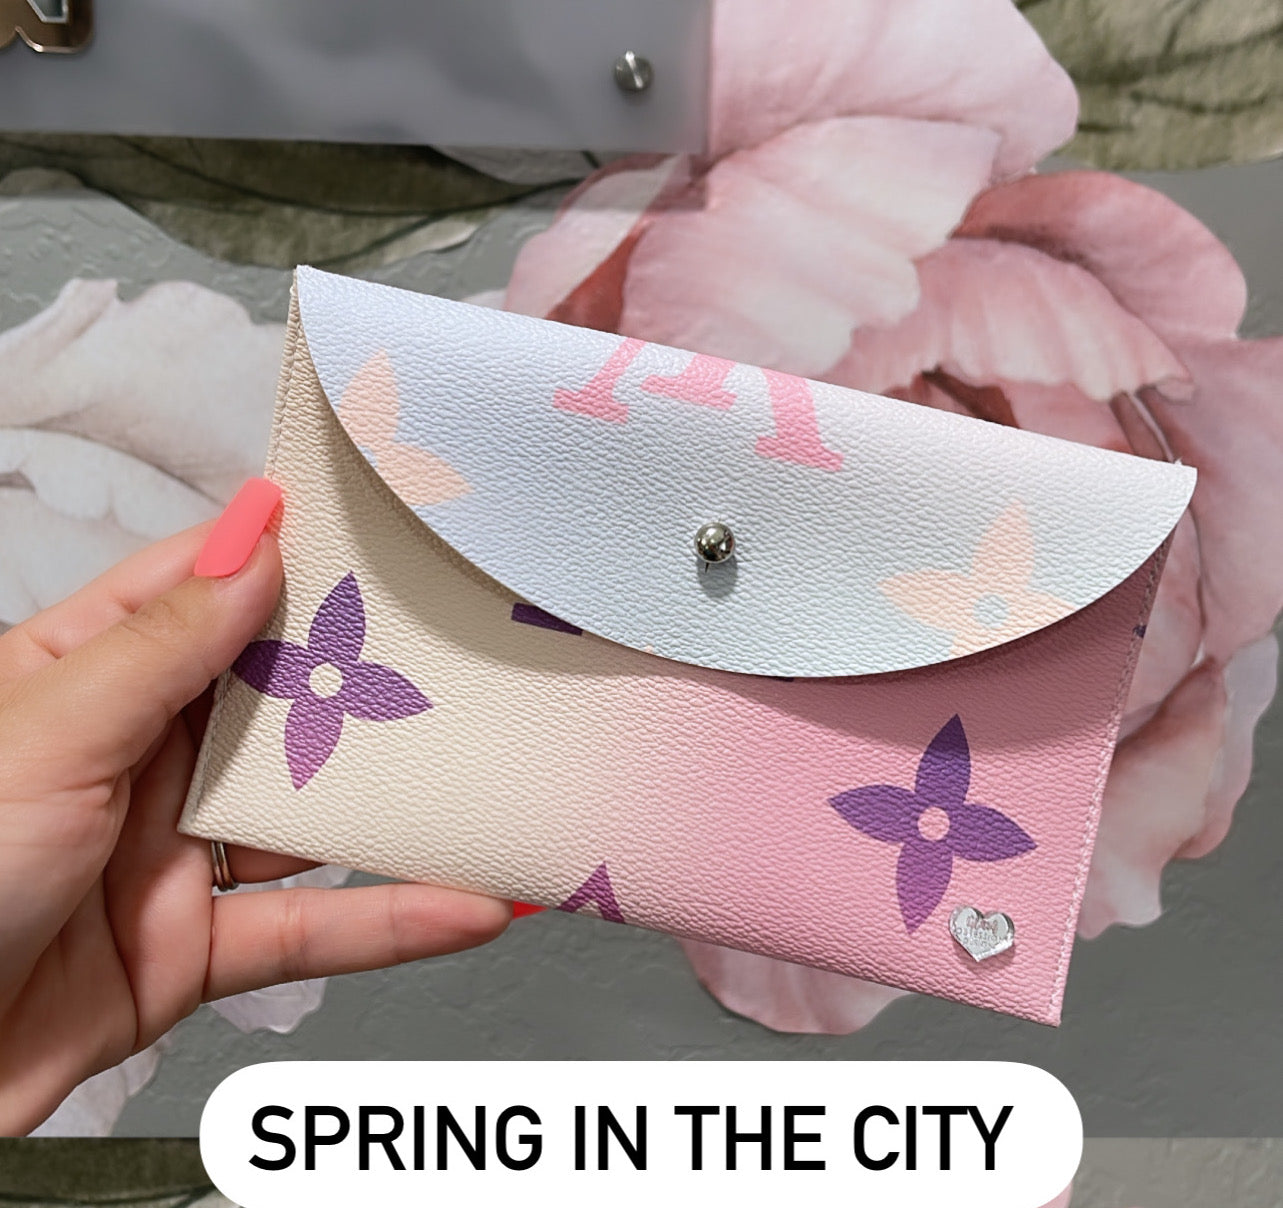 Louis Vuitton KIRIGAMI Pochette SPRING IN THE CITY Unboxing